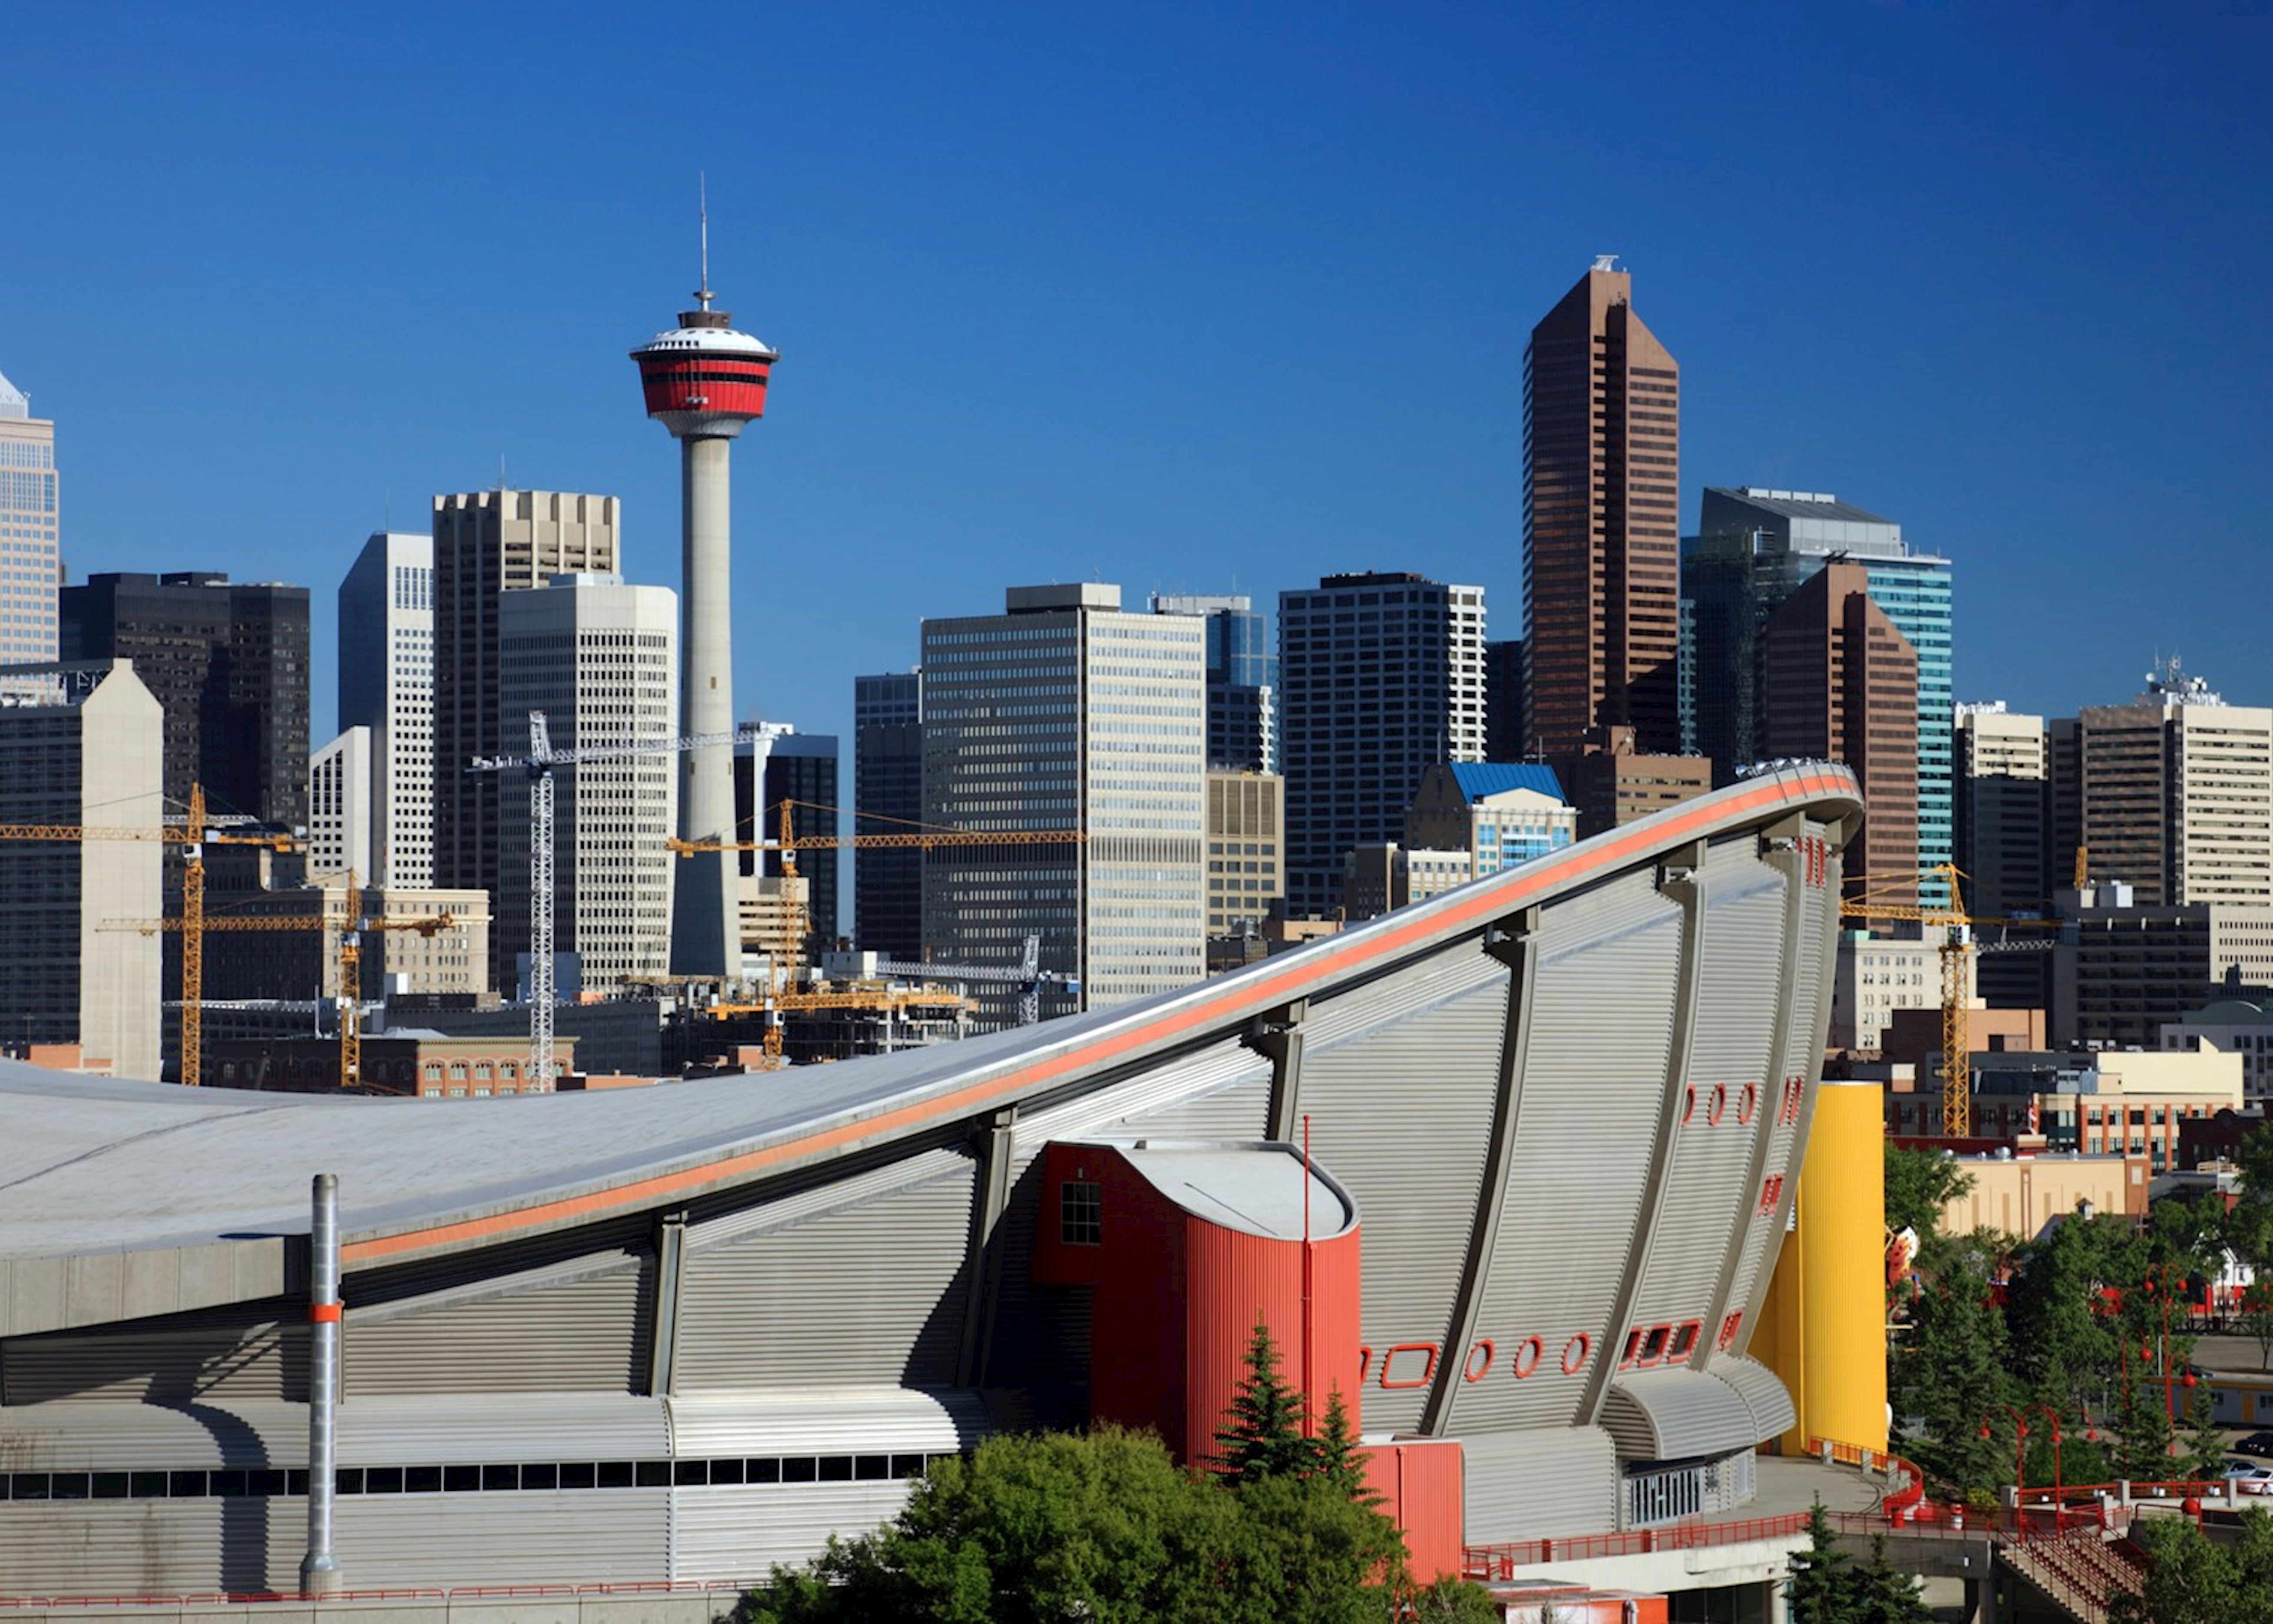 calgary tourism packages